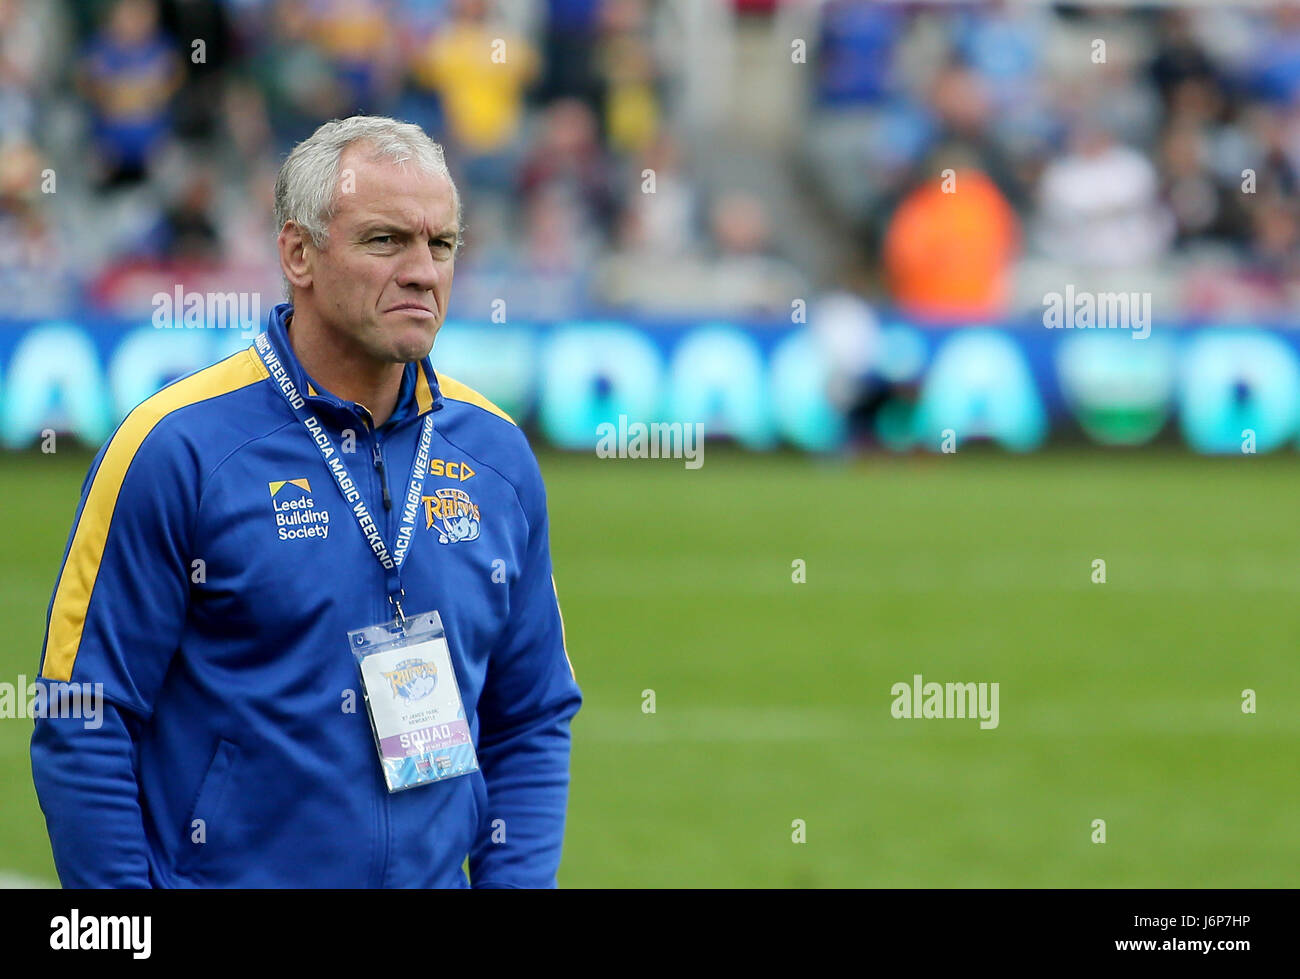 Leeds Rhinos head coach Brian McDermott during day two of the Betfred Super League Magic Weekend at St James' Park, Newcastle. PRESS ASSOCIATION Photo. Picture date: Sunday May 21, 2017. See PA story RUGBYL Castleford. Photo credit should read: Richard Sellers/PA Wire. Stock Photo